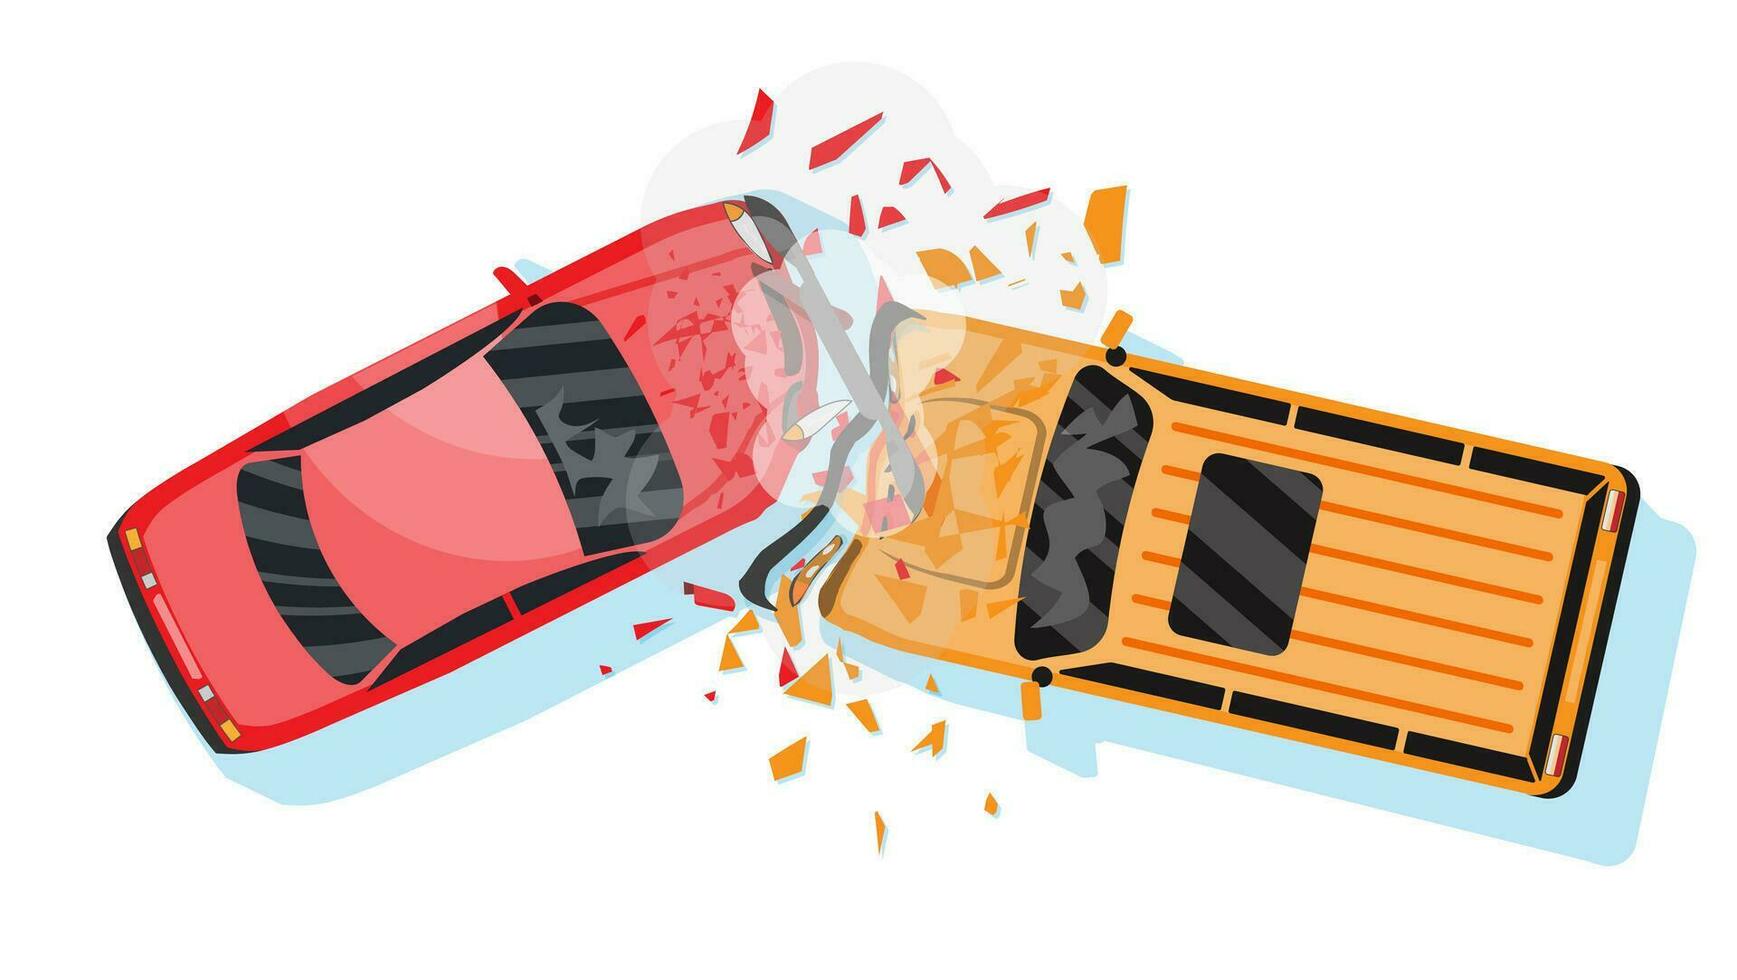 Road Accident Between Two Cars. Vehicle Collision Isolated on White. Broken Wings and Bumpers, Crashed Windows. Top View. Traffic Regulations. Rules of the Road. Vector Illustration in Flat Style